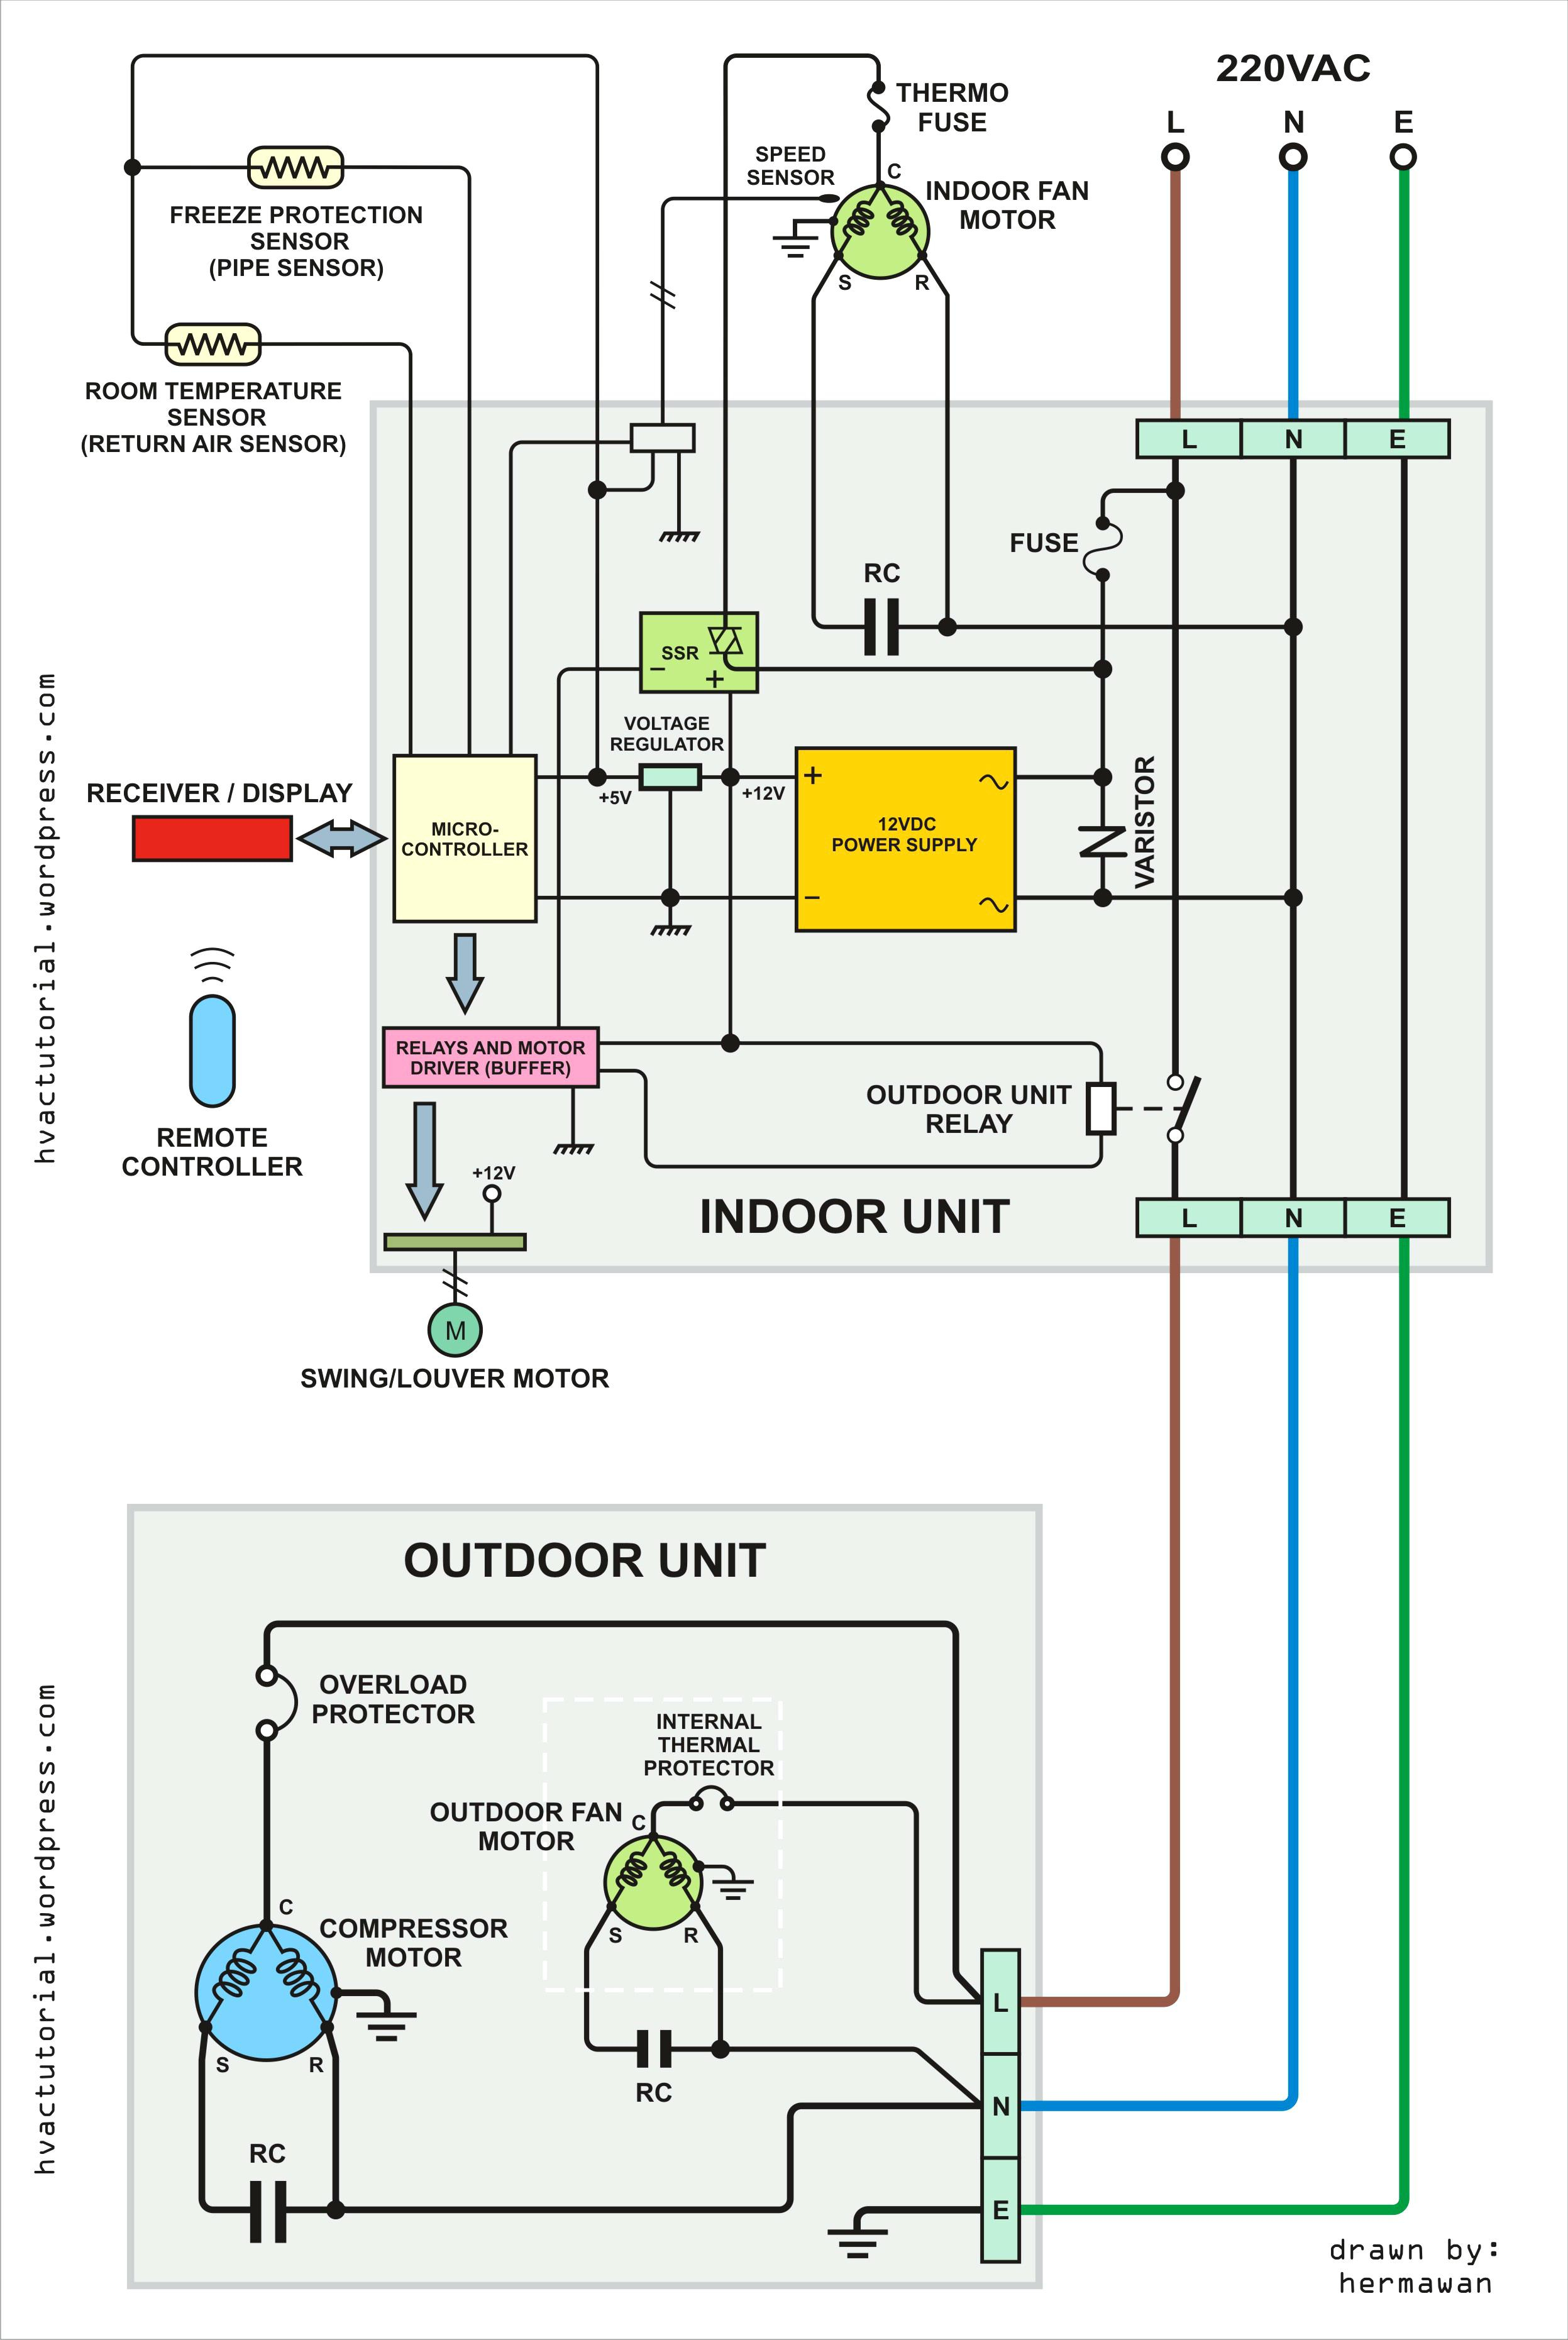 Schematic Of Bryant Gas Furnace Wiring Diagram - Wiring Diagram Data - Oil Furnace Wiring Diagram